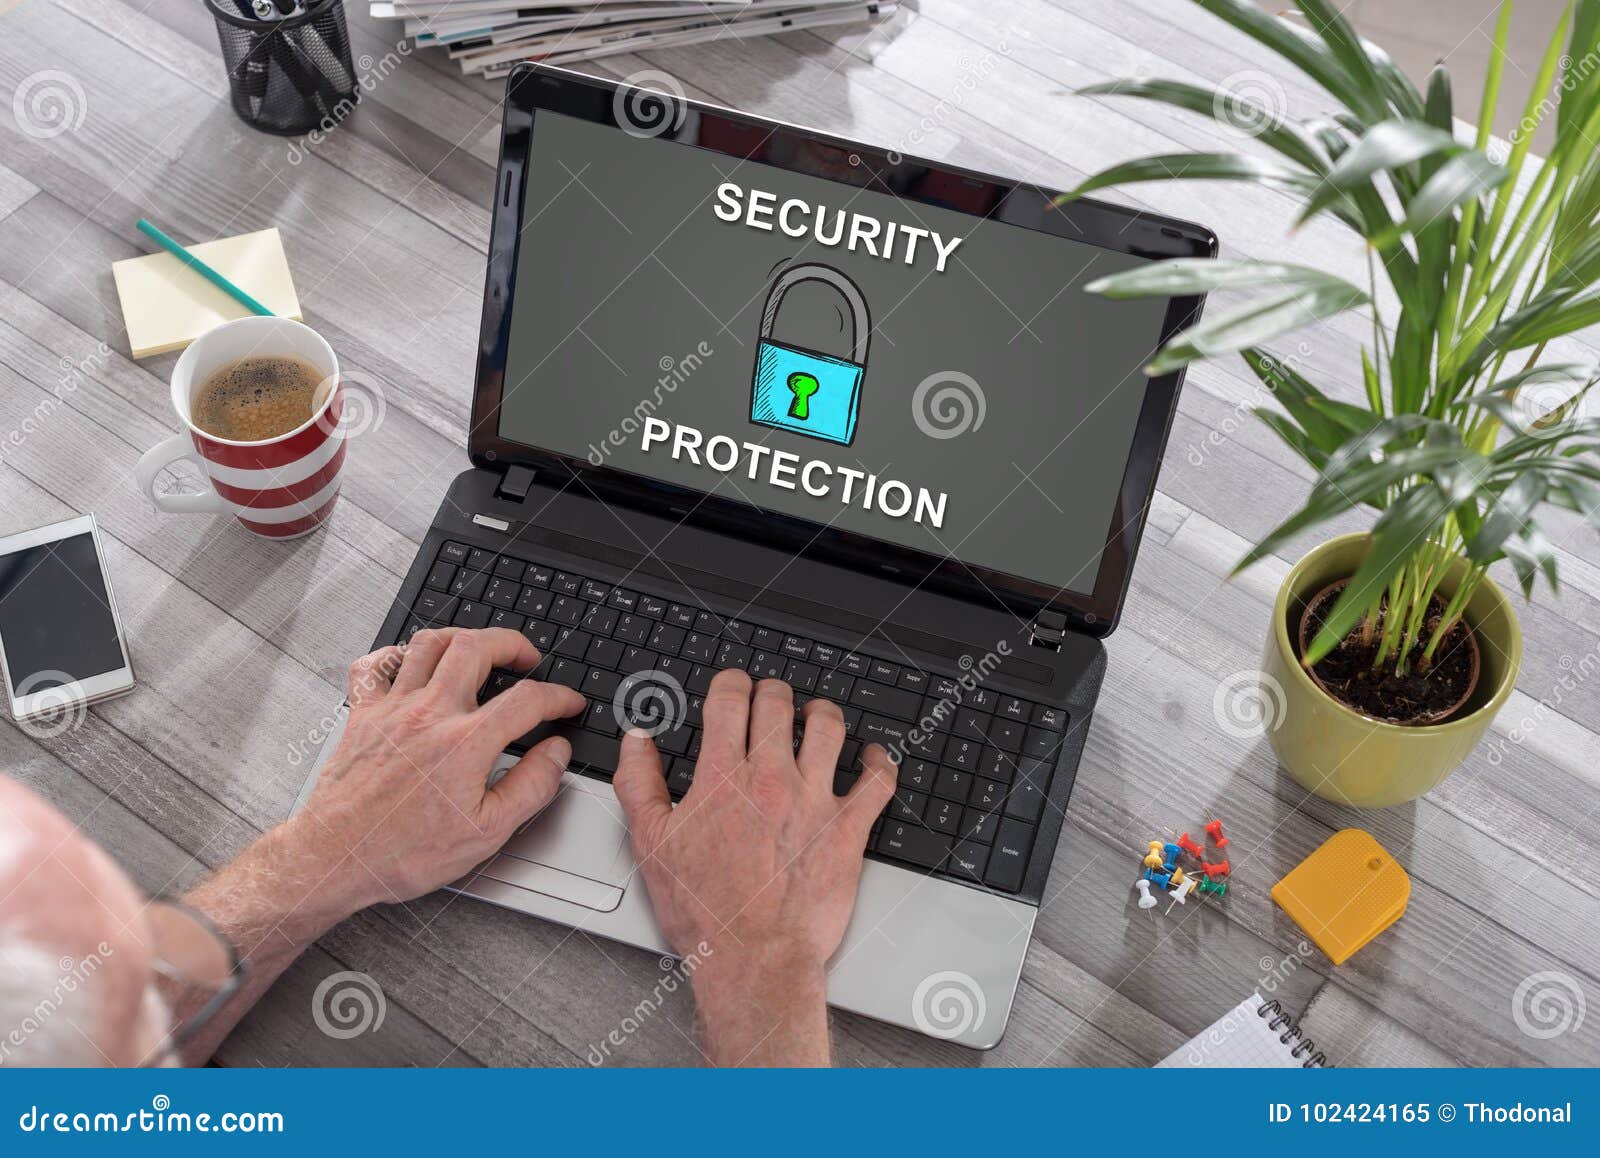 Cyber Security Concept on a Laptop Stock Image - Image of desk, padlock